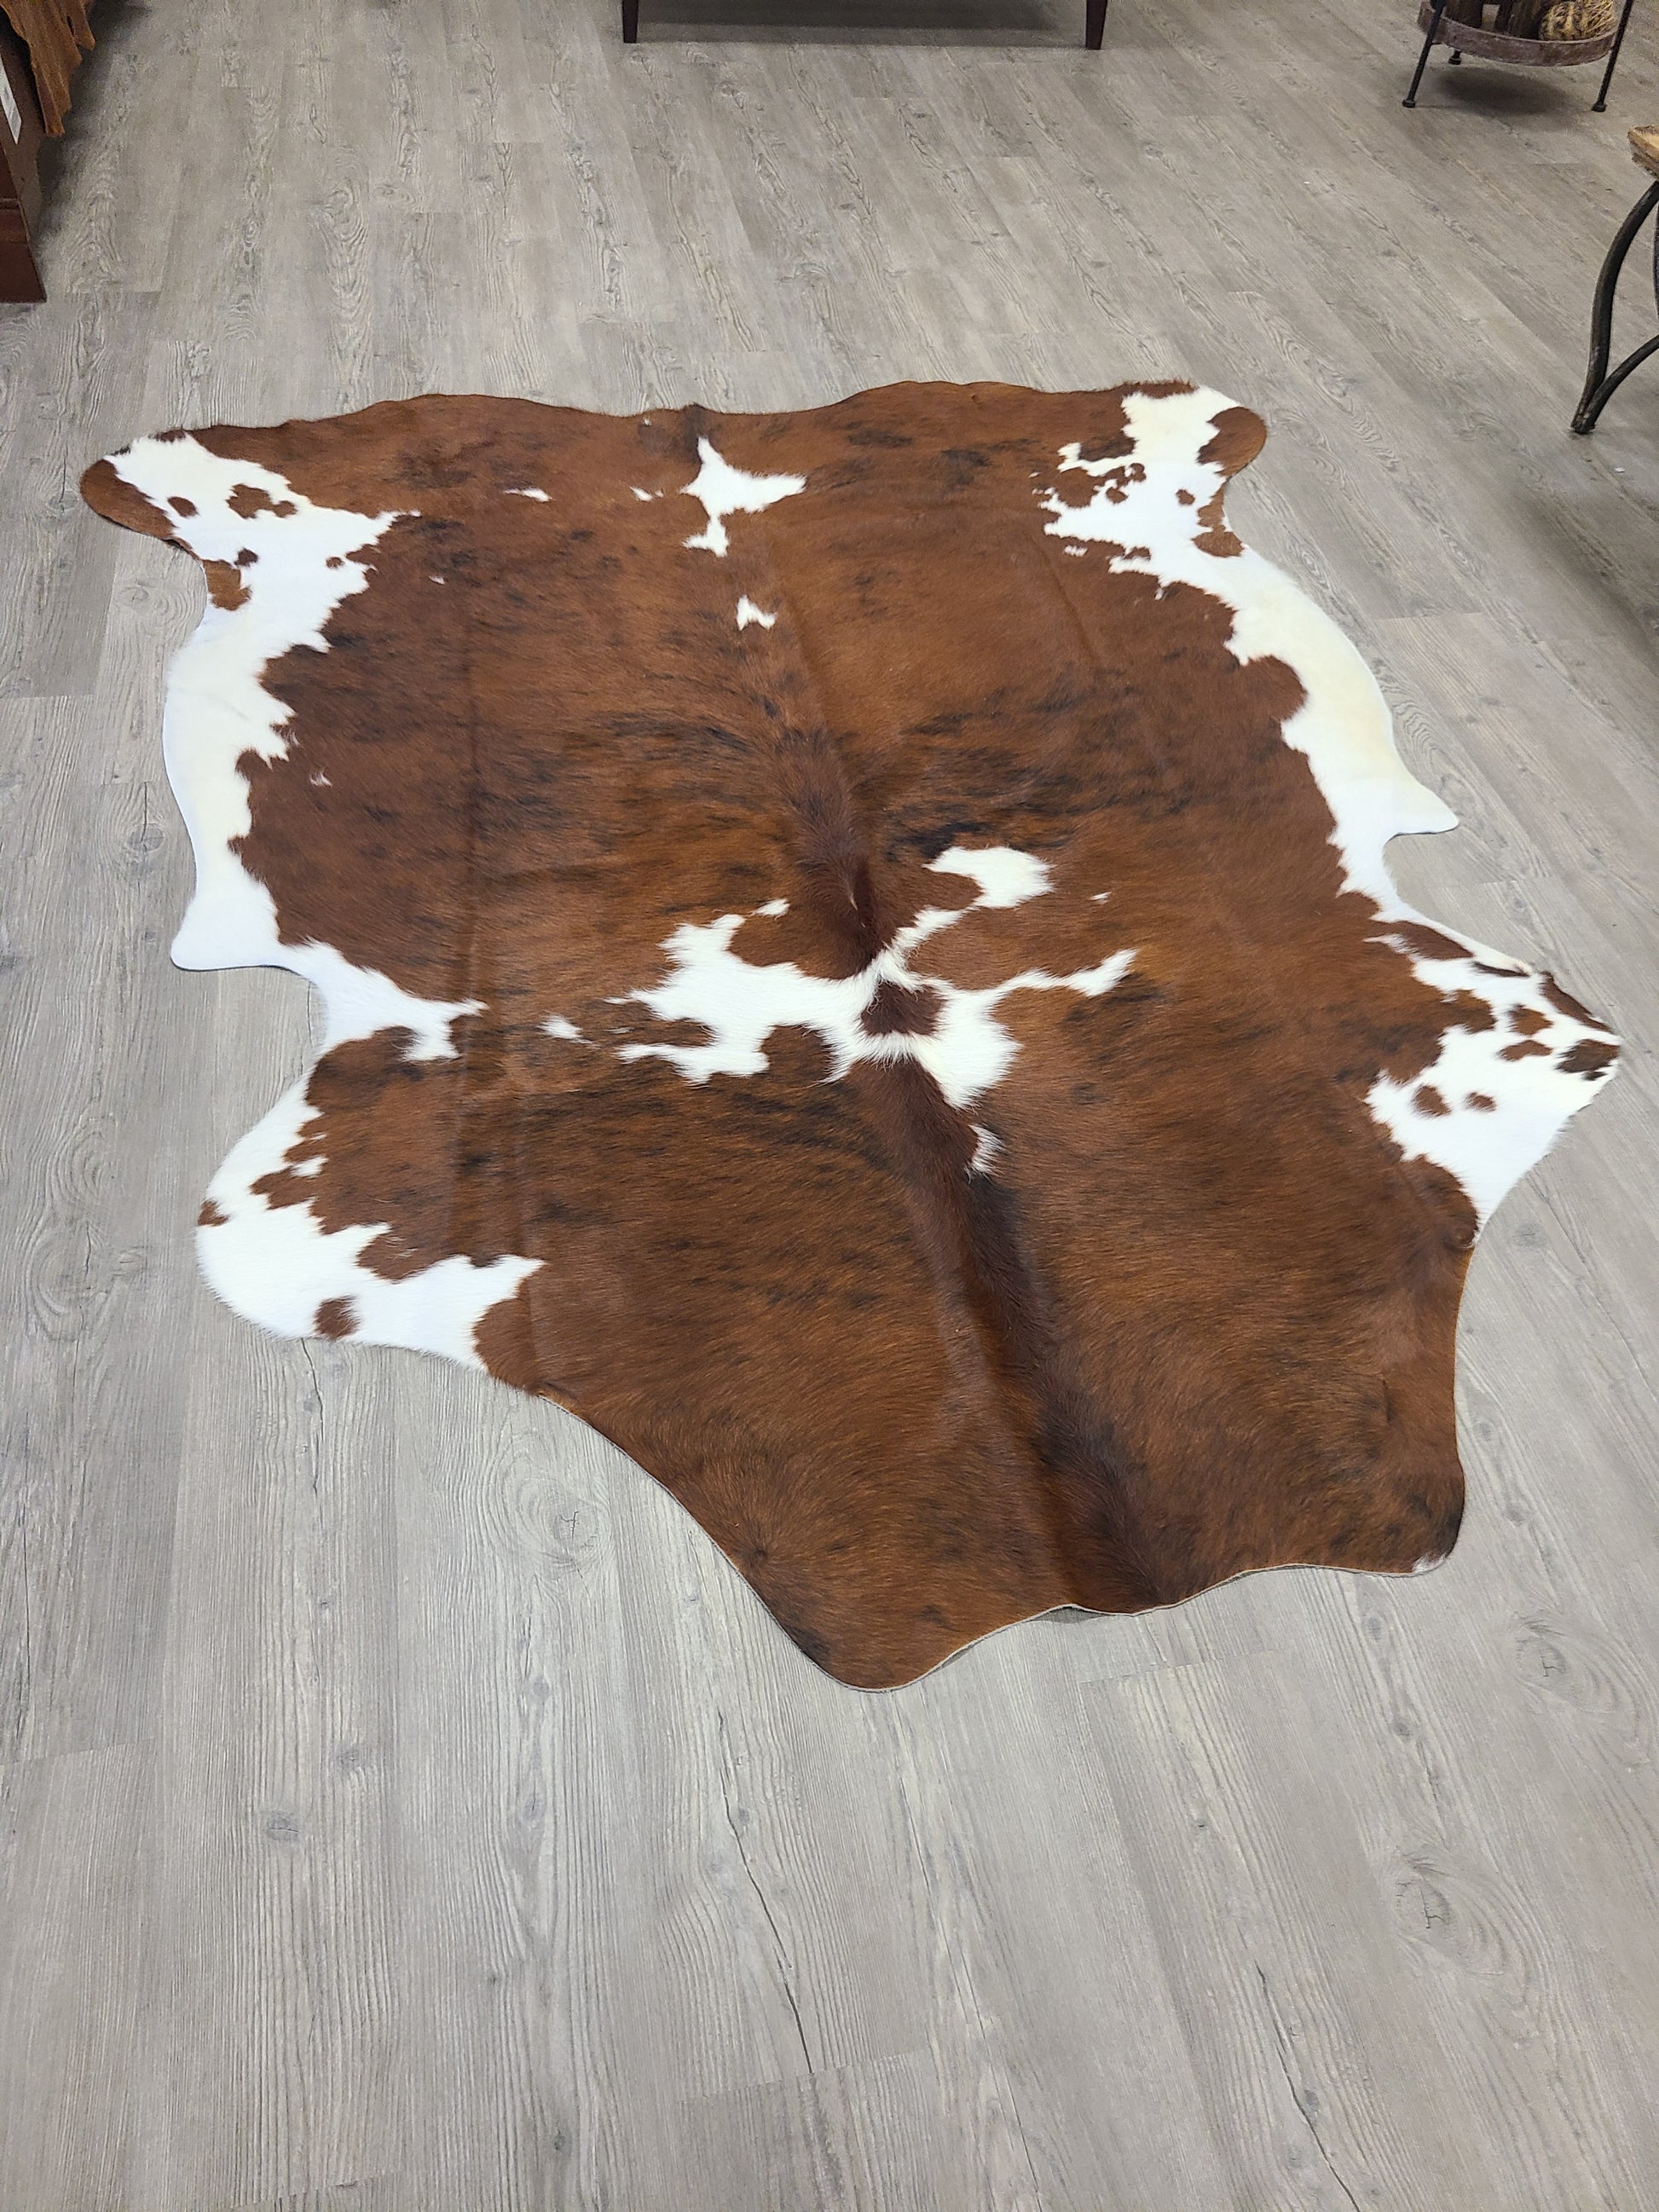 Brazilian Cowhide Rug - Brown & White Spotted - 8 ft x 6 ft-Status Co. Leather Studio